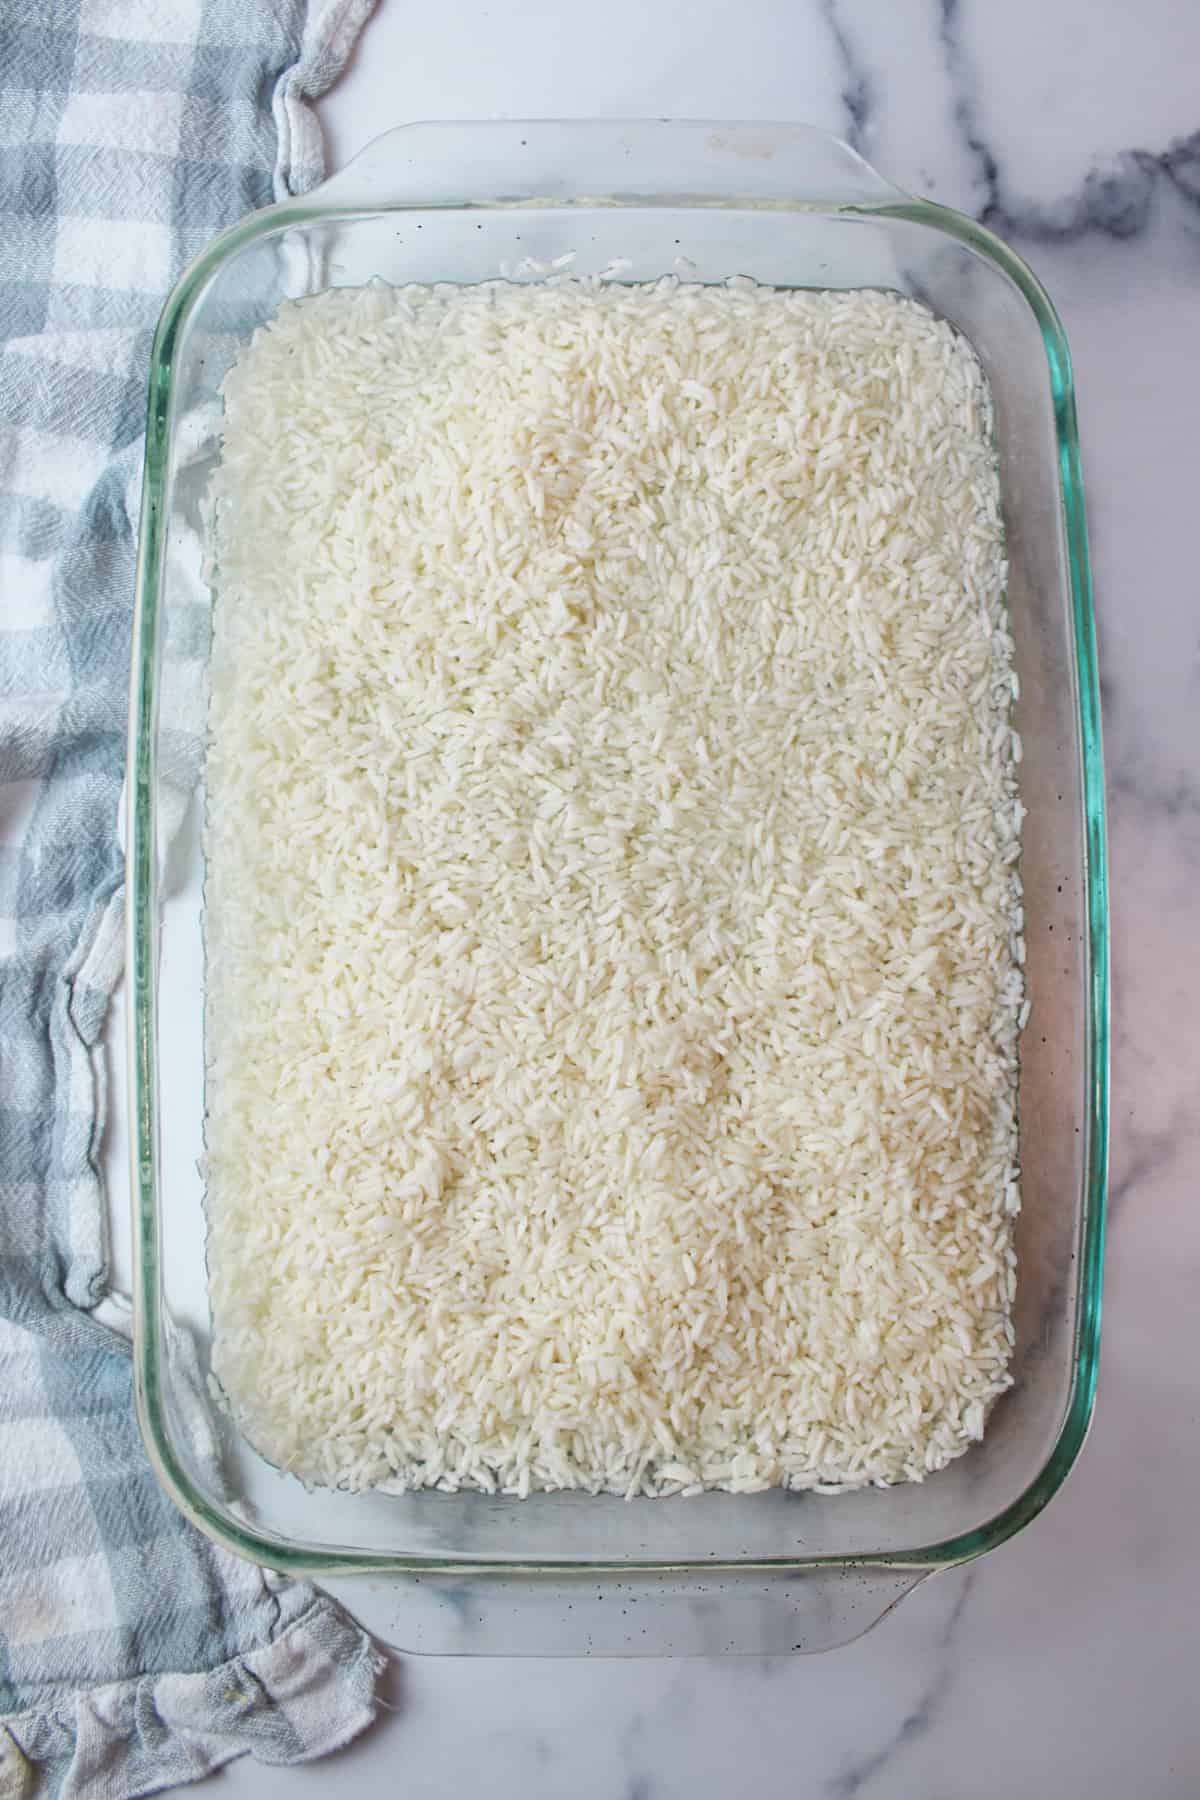 aerial view of glass baking dish with white rice inside